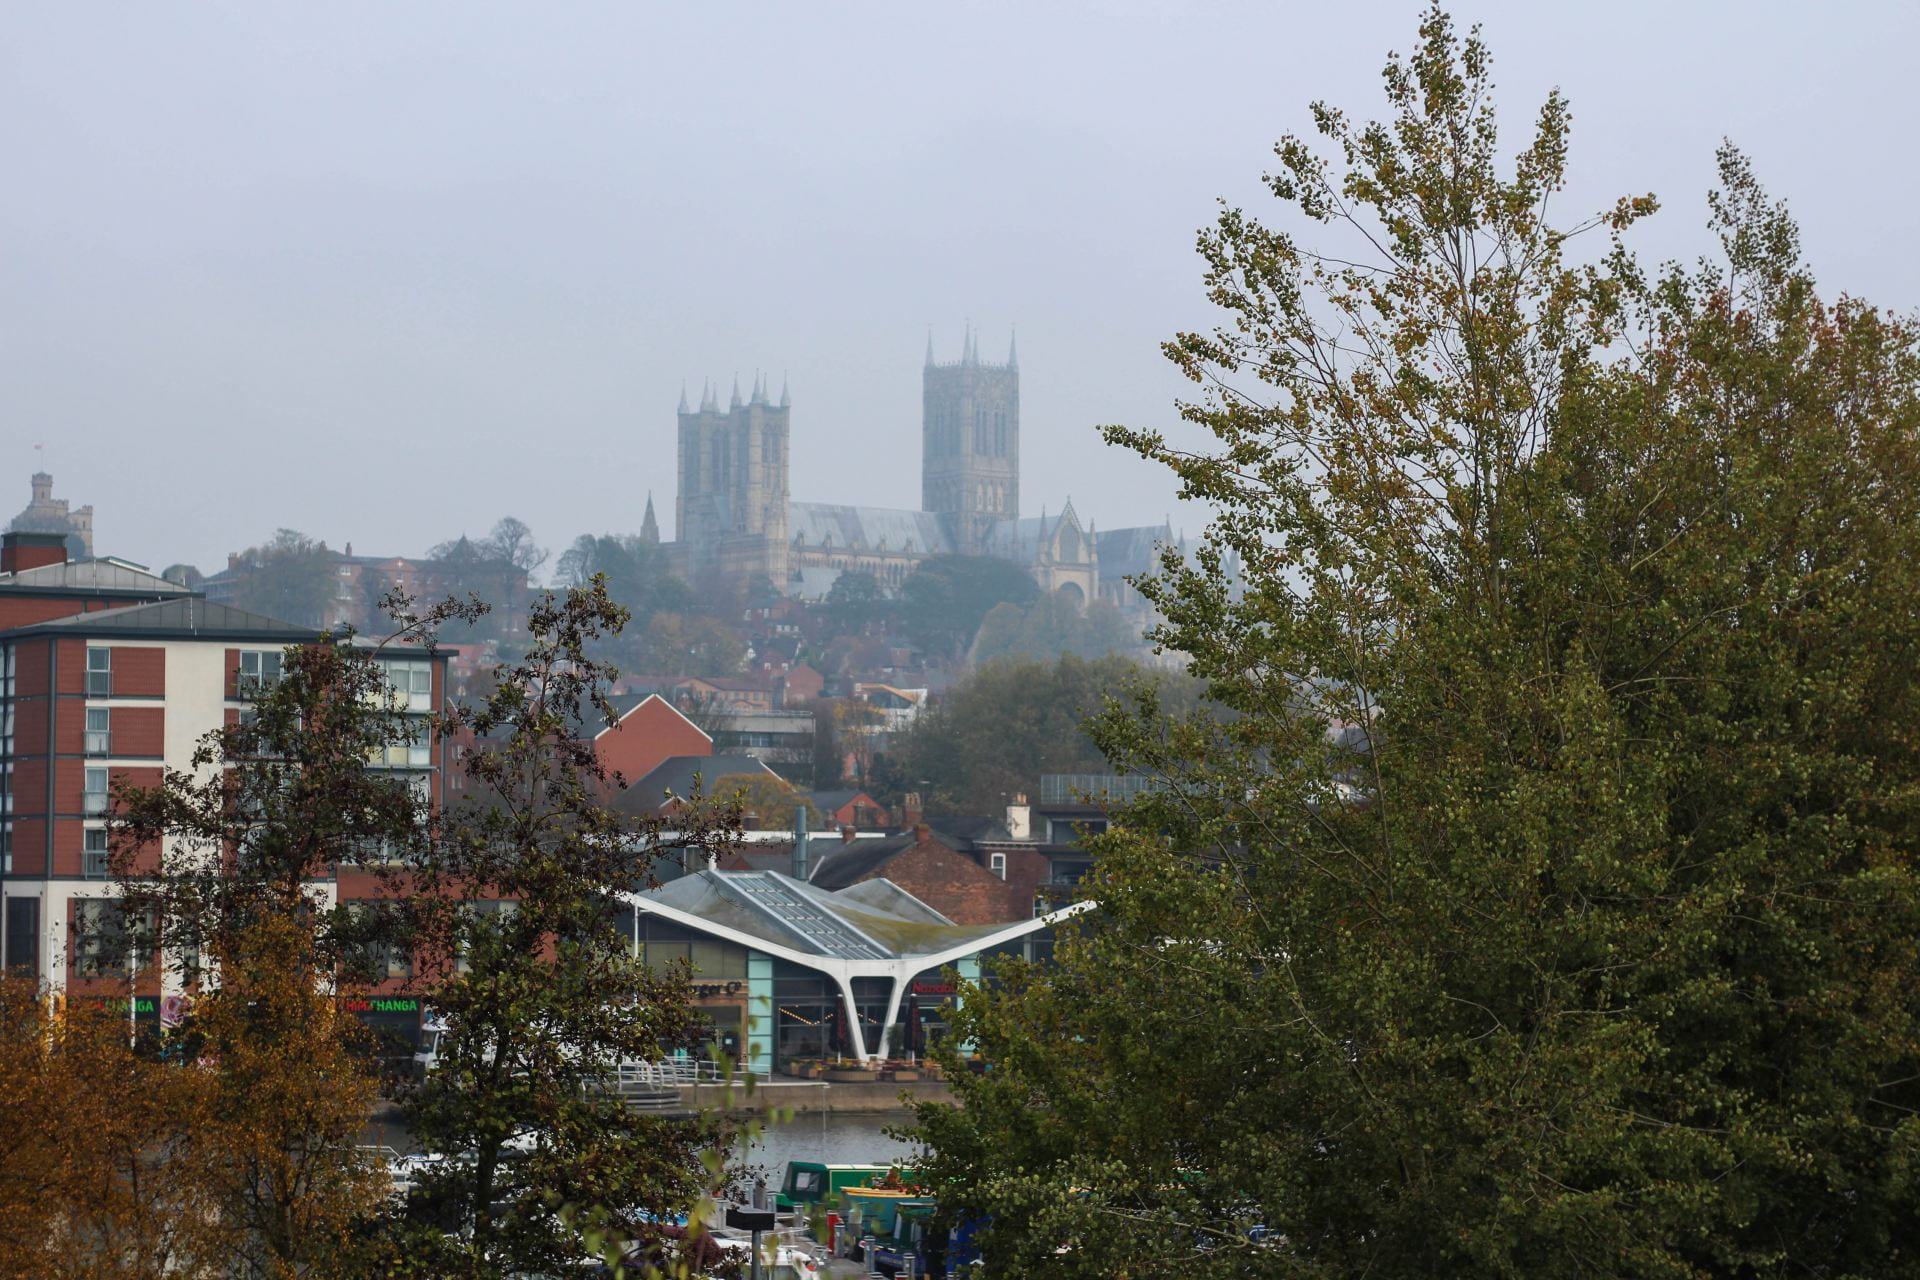 Photograph overlooking the Brayford river with the cathedral visible in the background